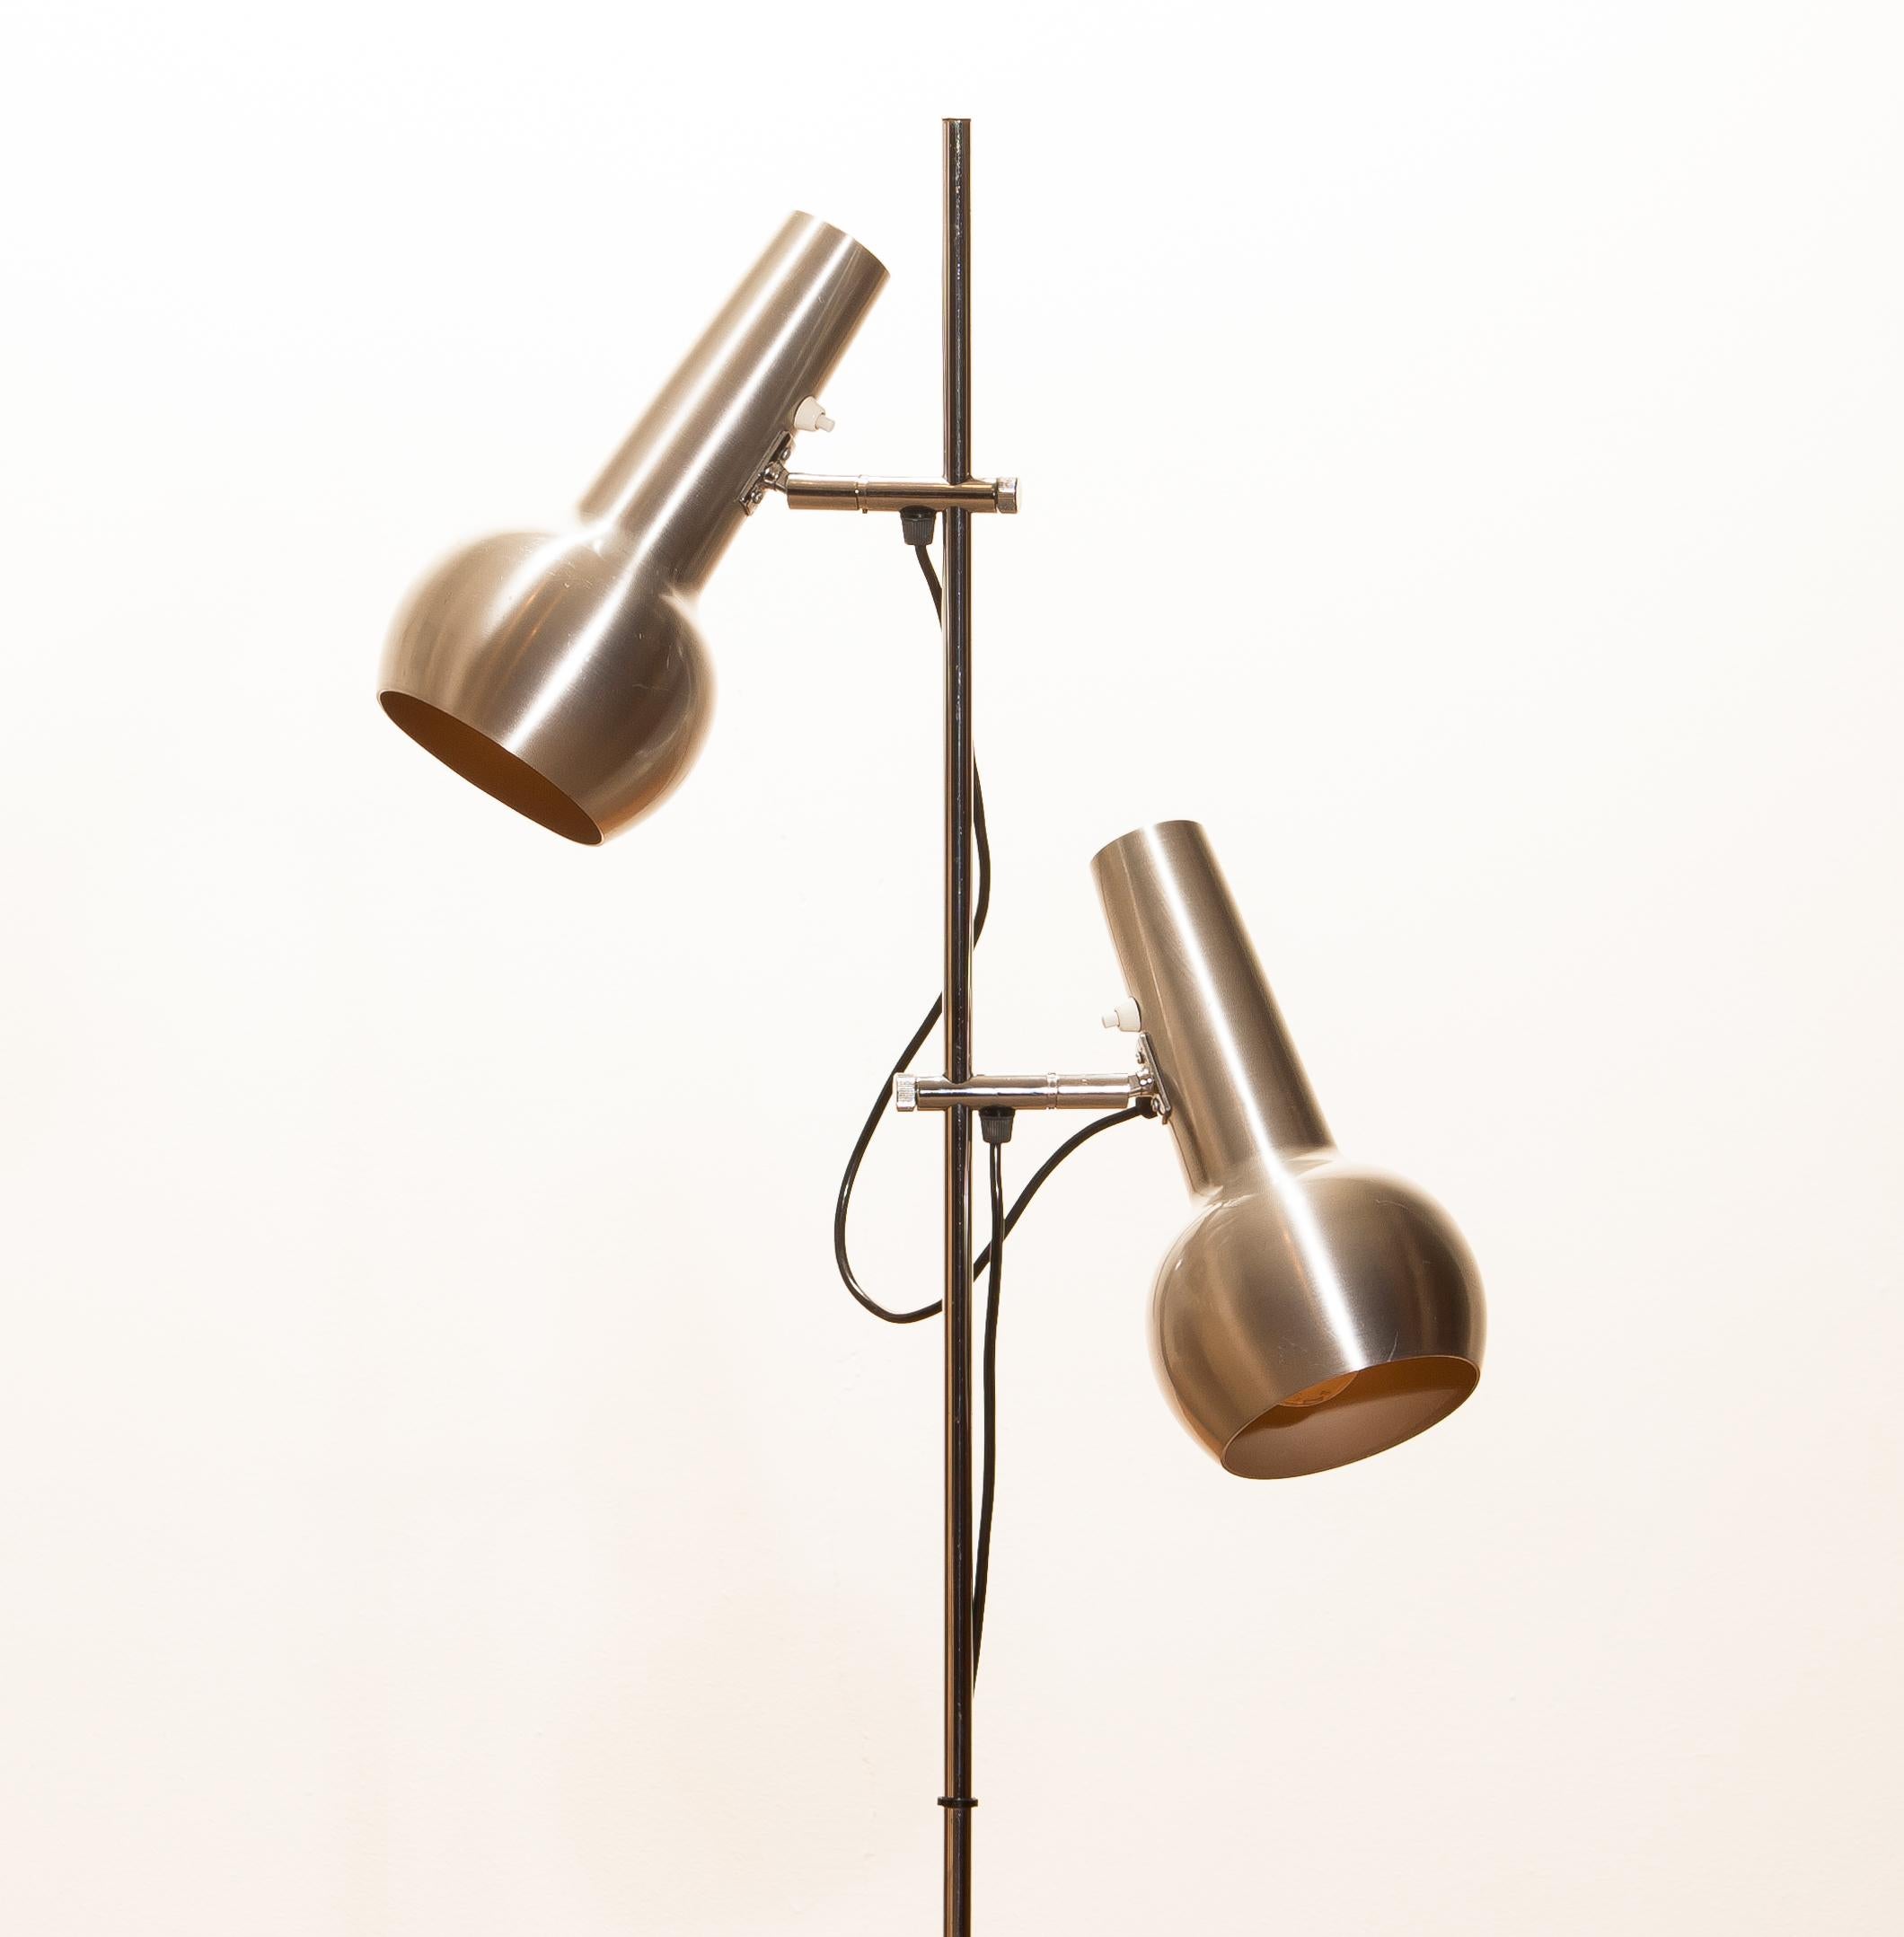 1970s, Chrome and Aluminium Double Shade Floor Lamp by Koch & Lowy (Moderne der Mitte des Jahrhunderts)